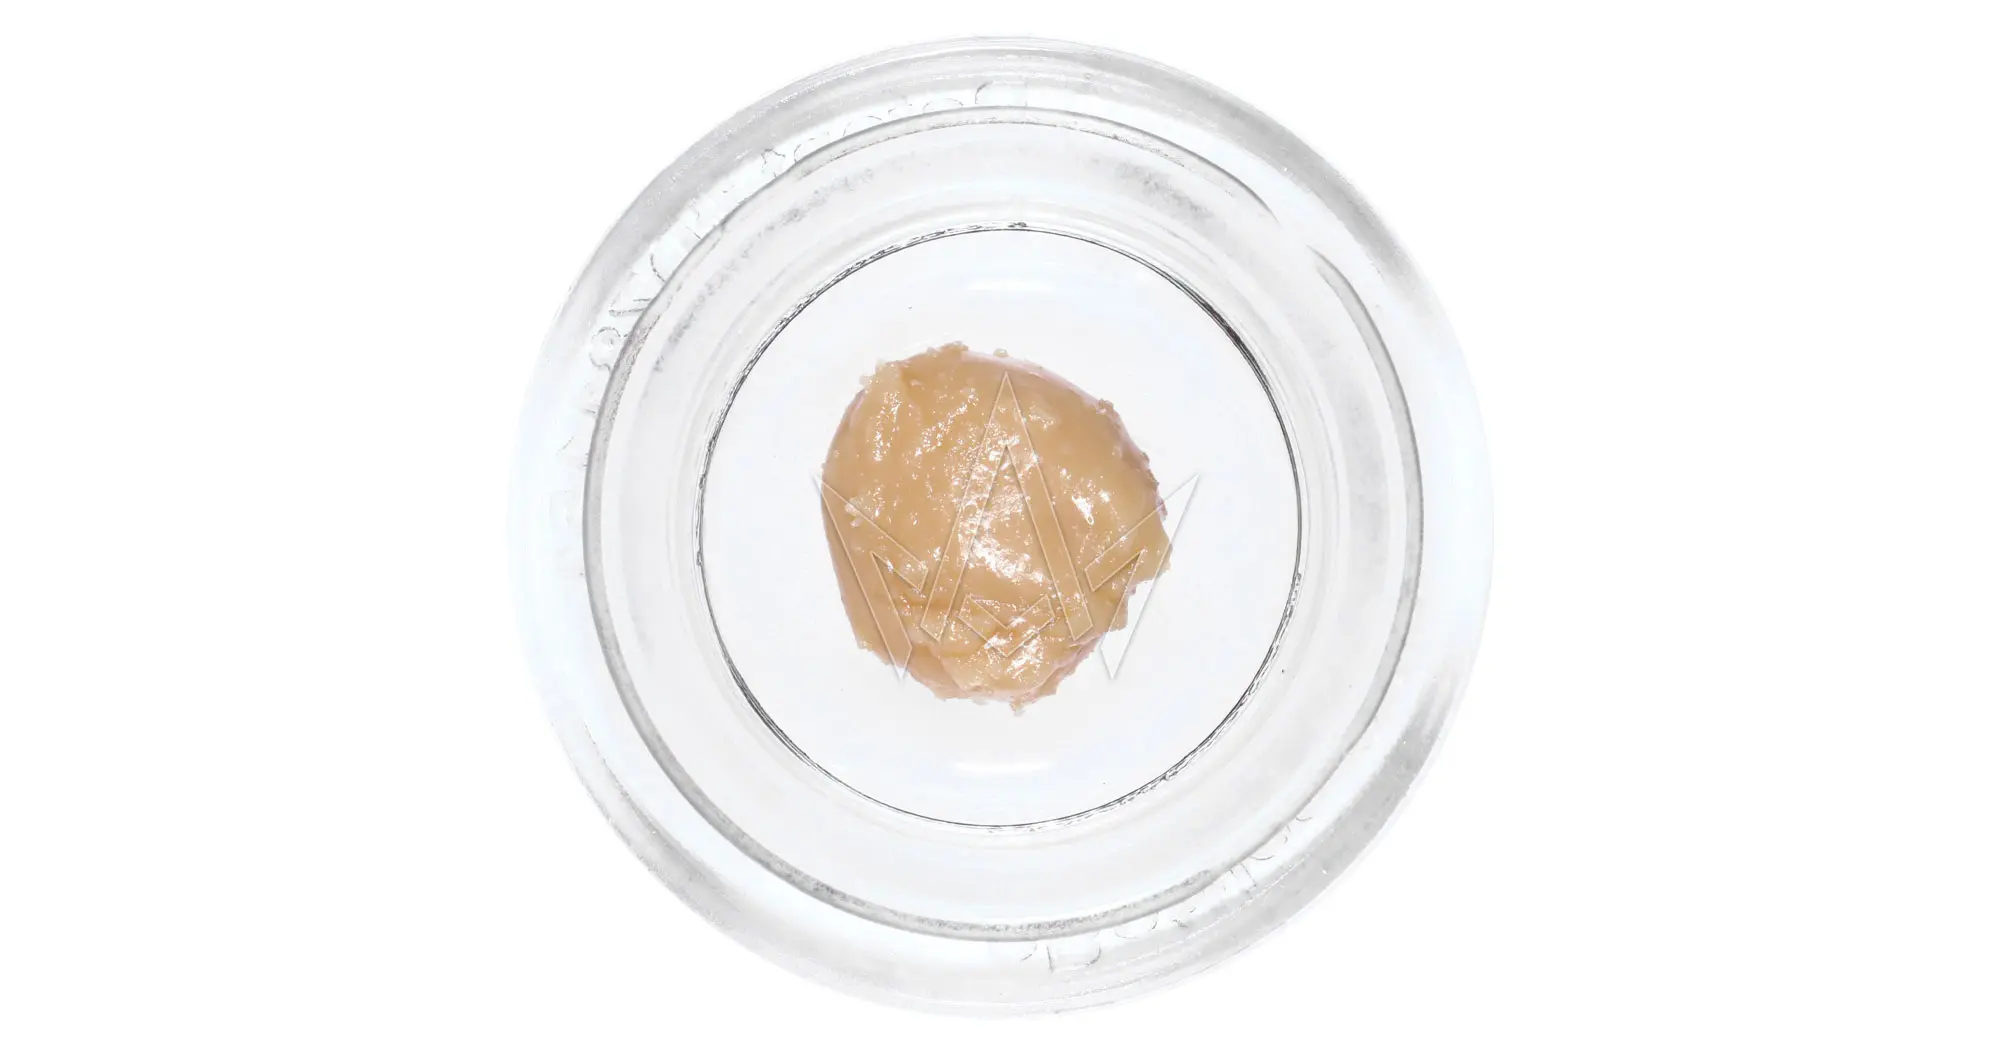 Whitethorn Rose Cold Cure Rosin